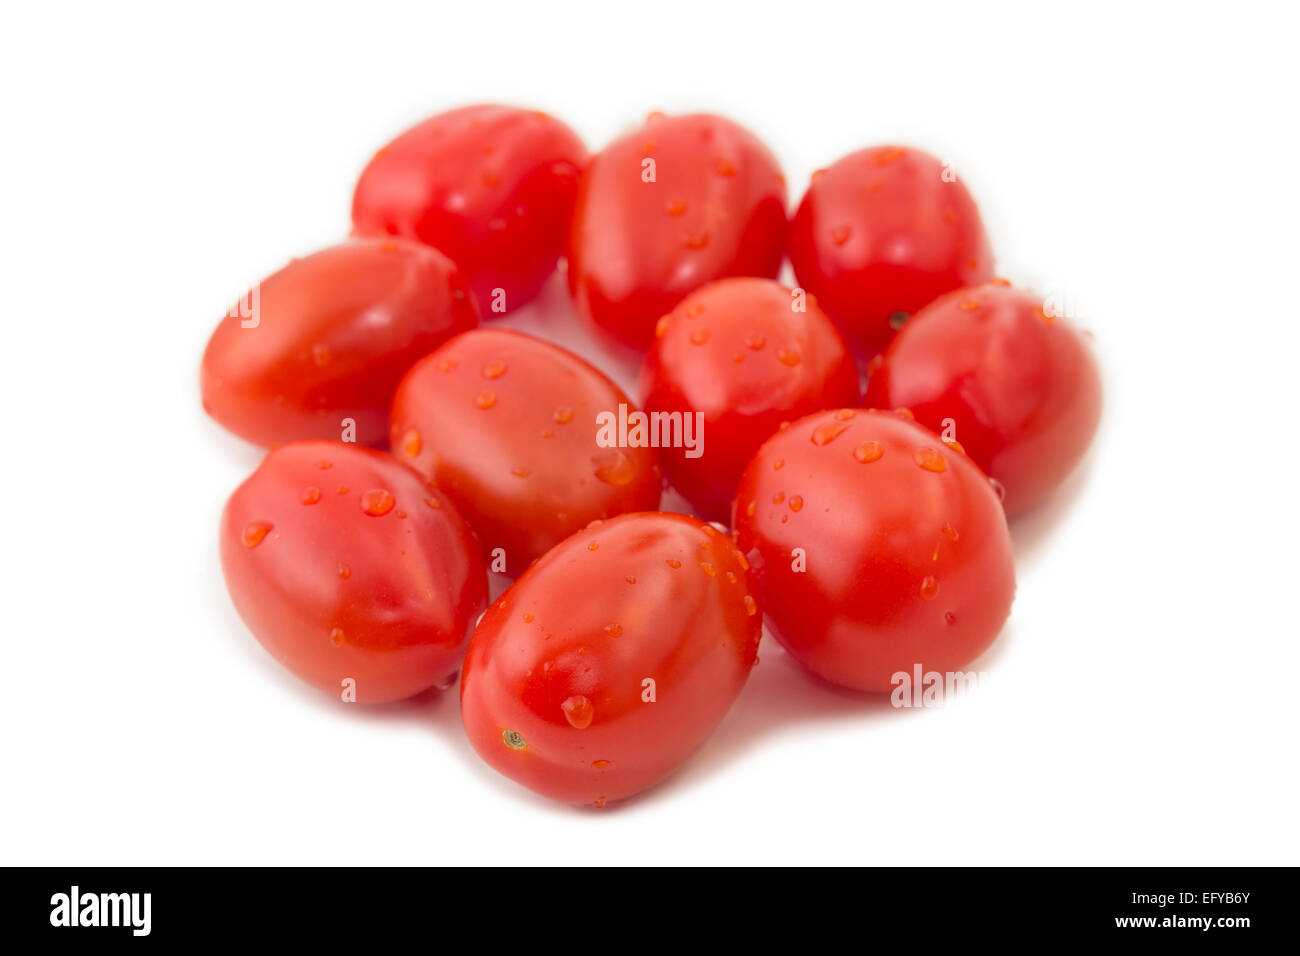 Closeup of several ripe plum tomatoes (also known as a processing tomatoes or paste tomatoes), isolated on white background Stock Photo